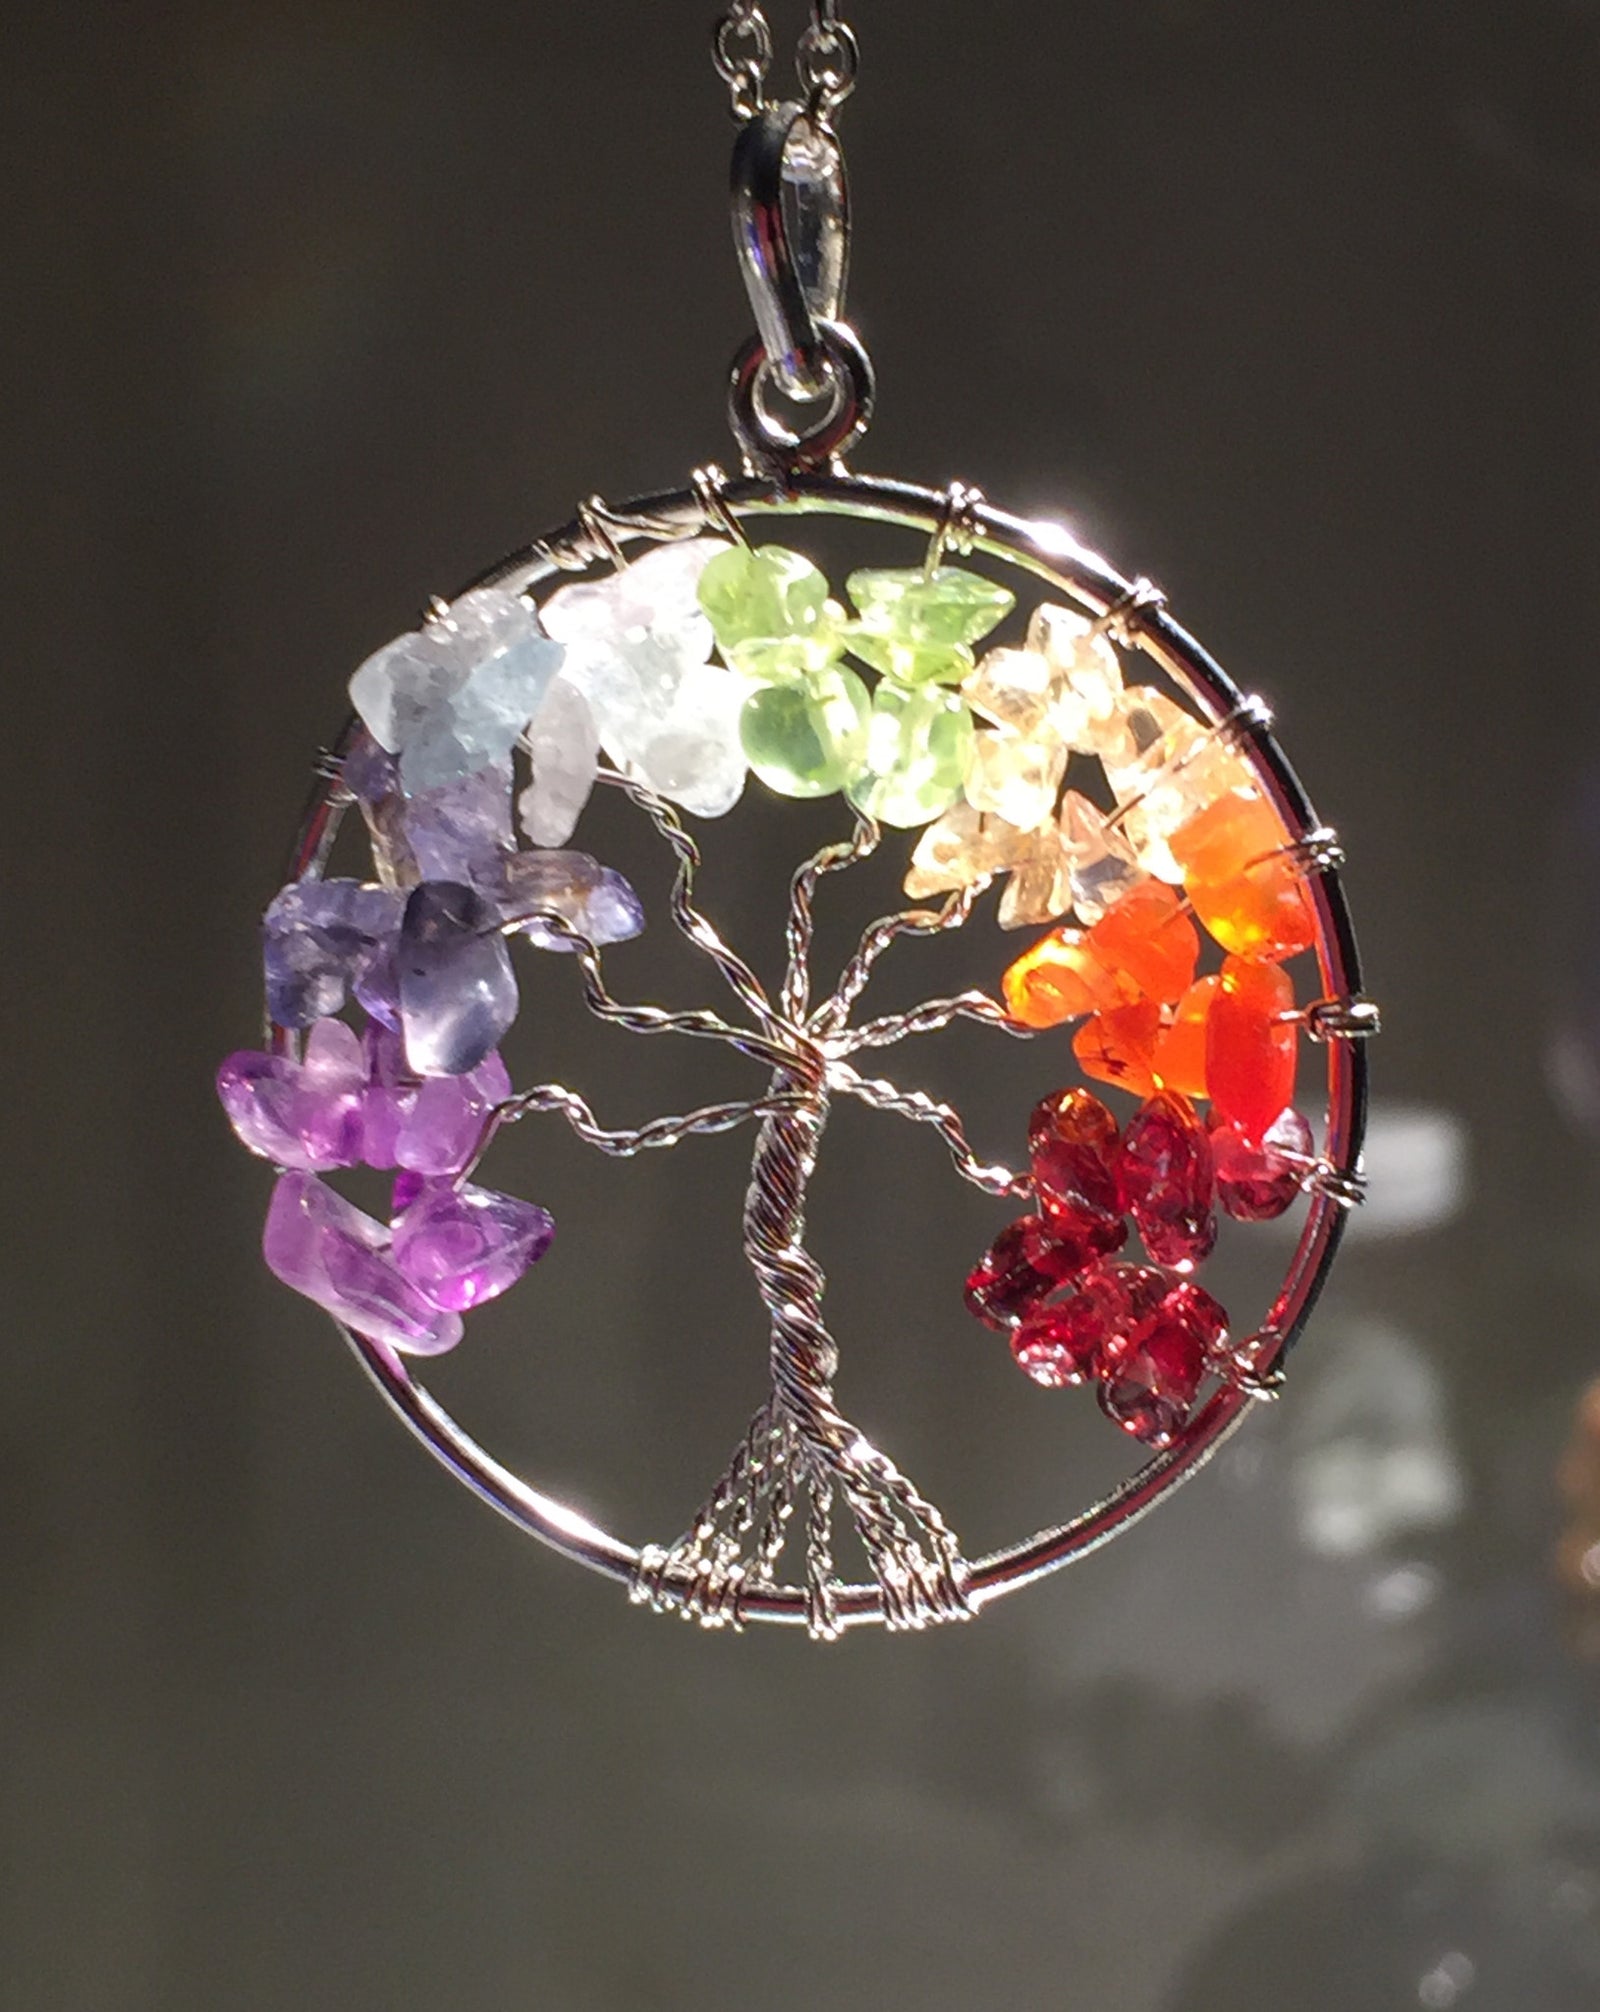 Cremation Jewelry - Moon and Stars Tree of Life Pendant with Cremains